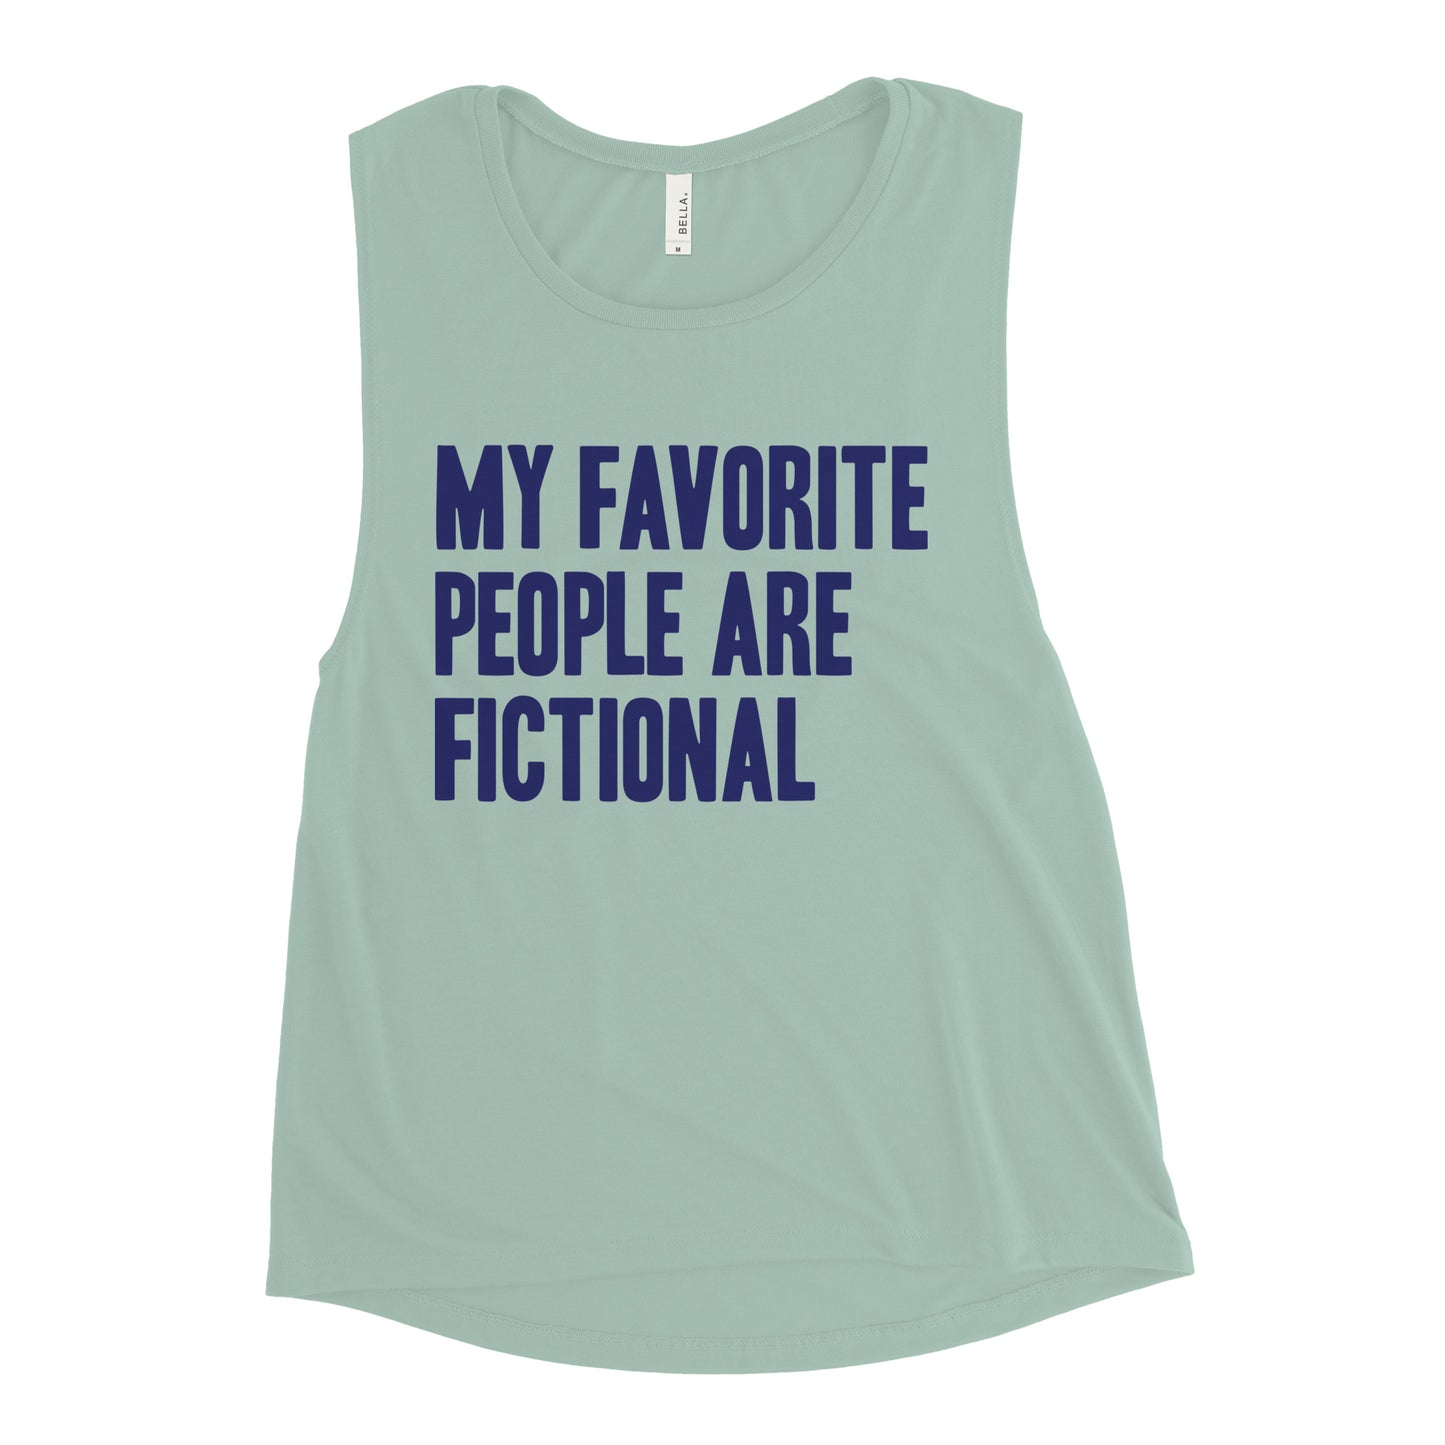 My Favorite People Are Fictional Women's Muscle Tank